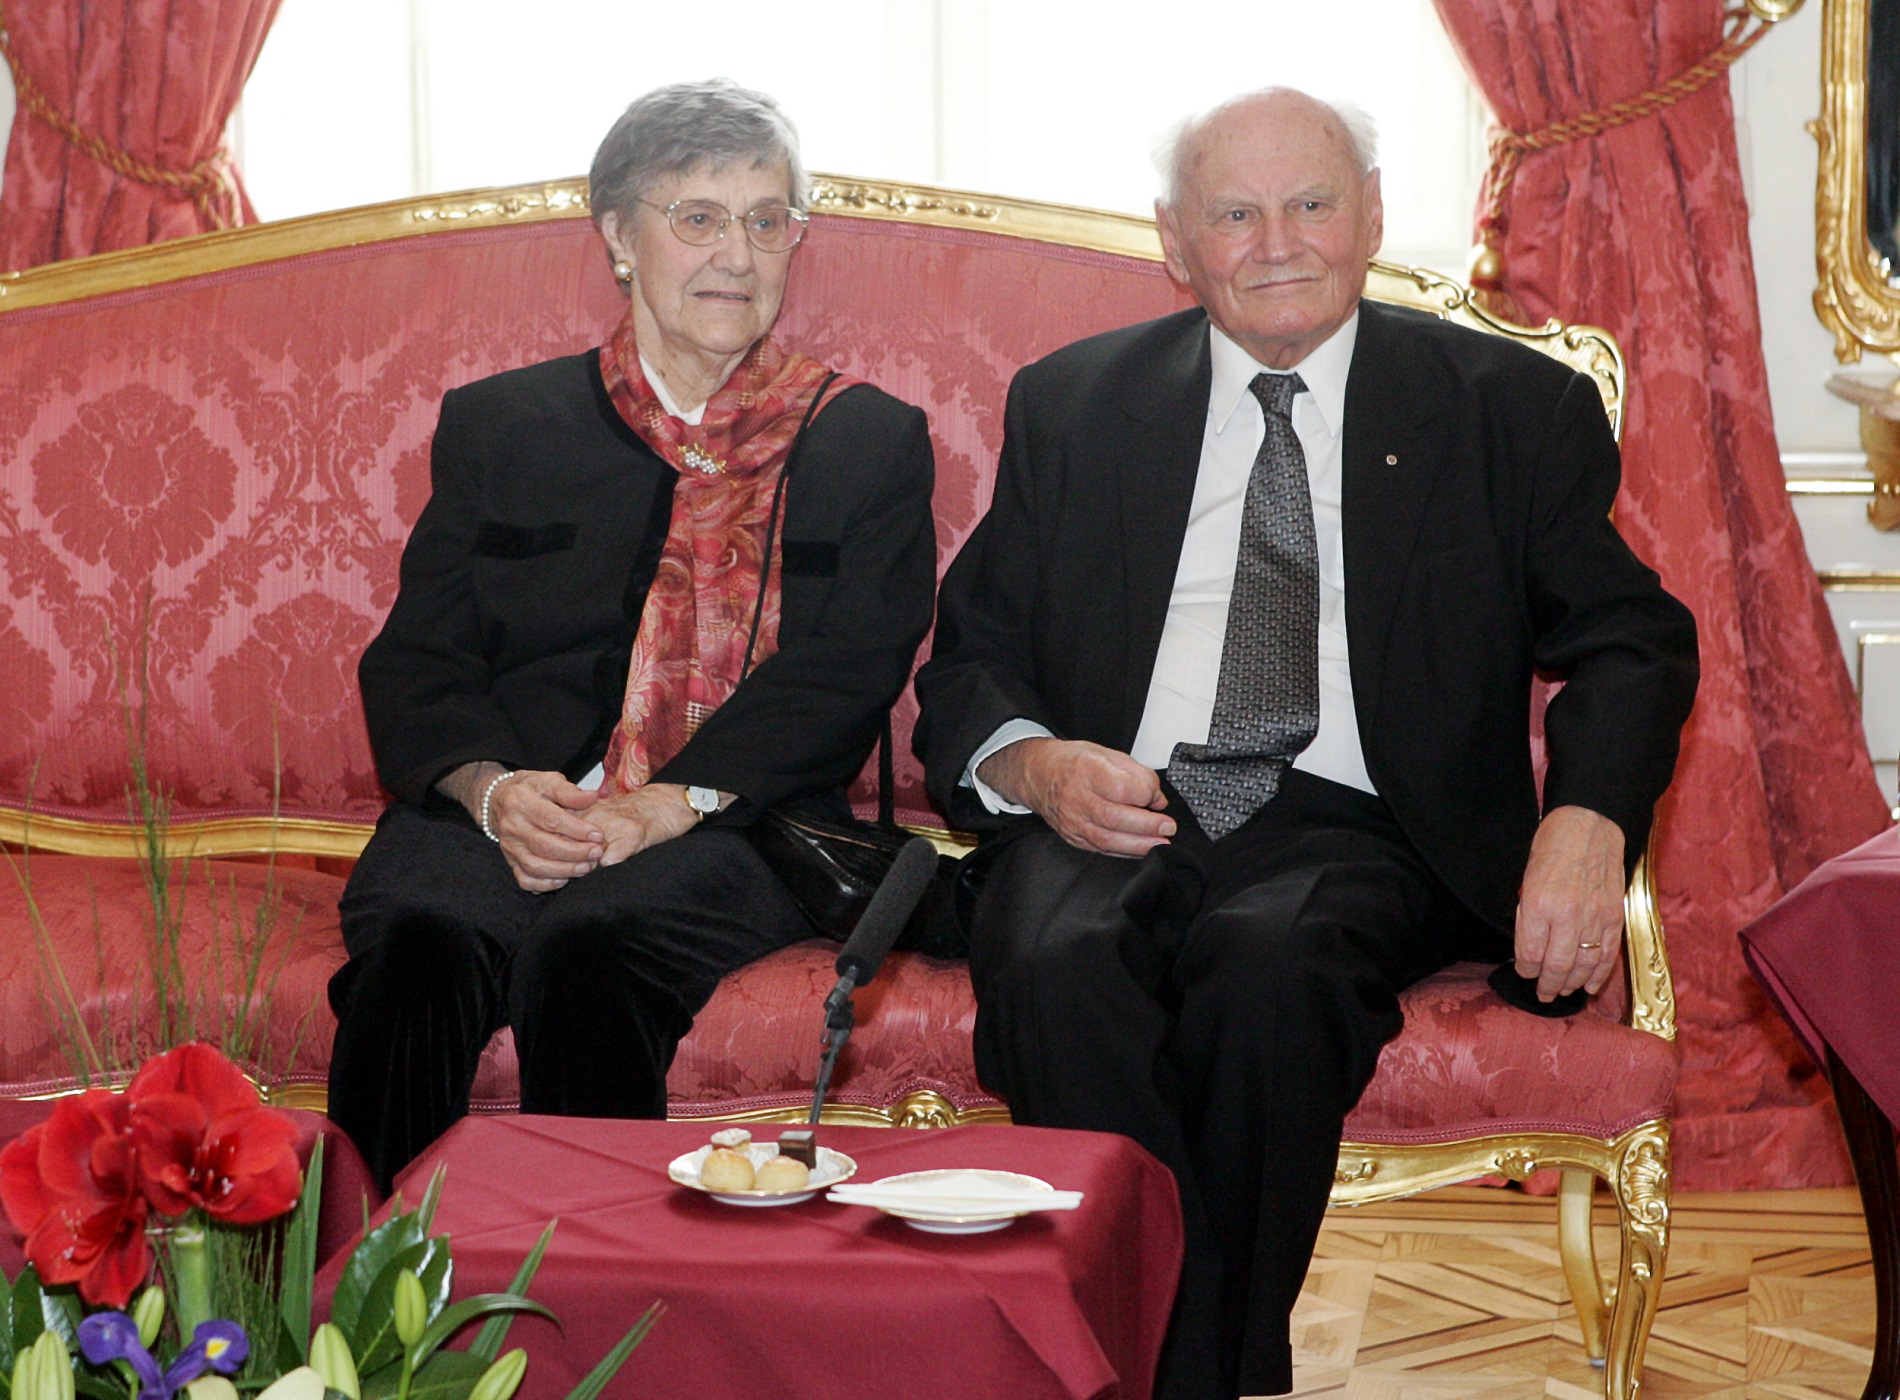 Sitting on an armchair with his wife Zsuzsanna, first president of the Hungarian Republic after the communist regime was broken in eastern and middle-European countries, Arpad Goencz poses in the Sandor Palace of the presidential residency on top of the Buda Palace hill 09 February 2007 on Goencz's 85th birthday. Goencz was voted into the presidental chair in 1990 and re-elected in 1995 by the Hungarian Parliament. AFP PHOTO / ATTILA KISBENEDEK